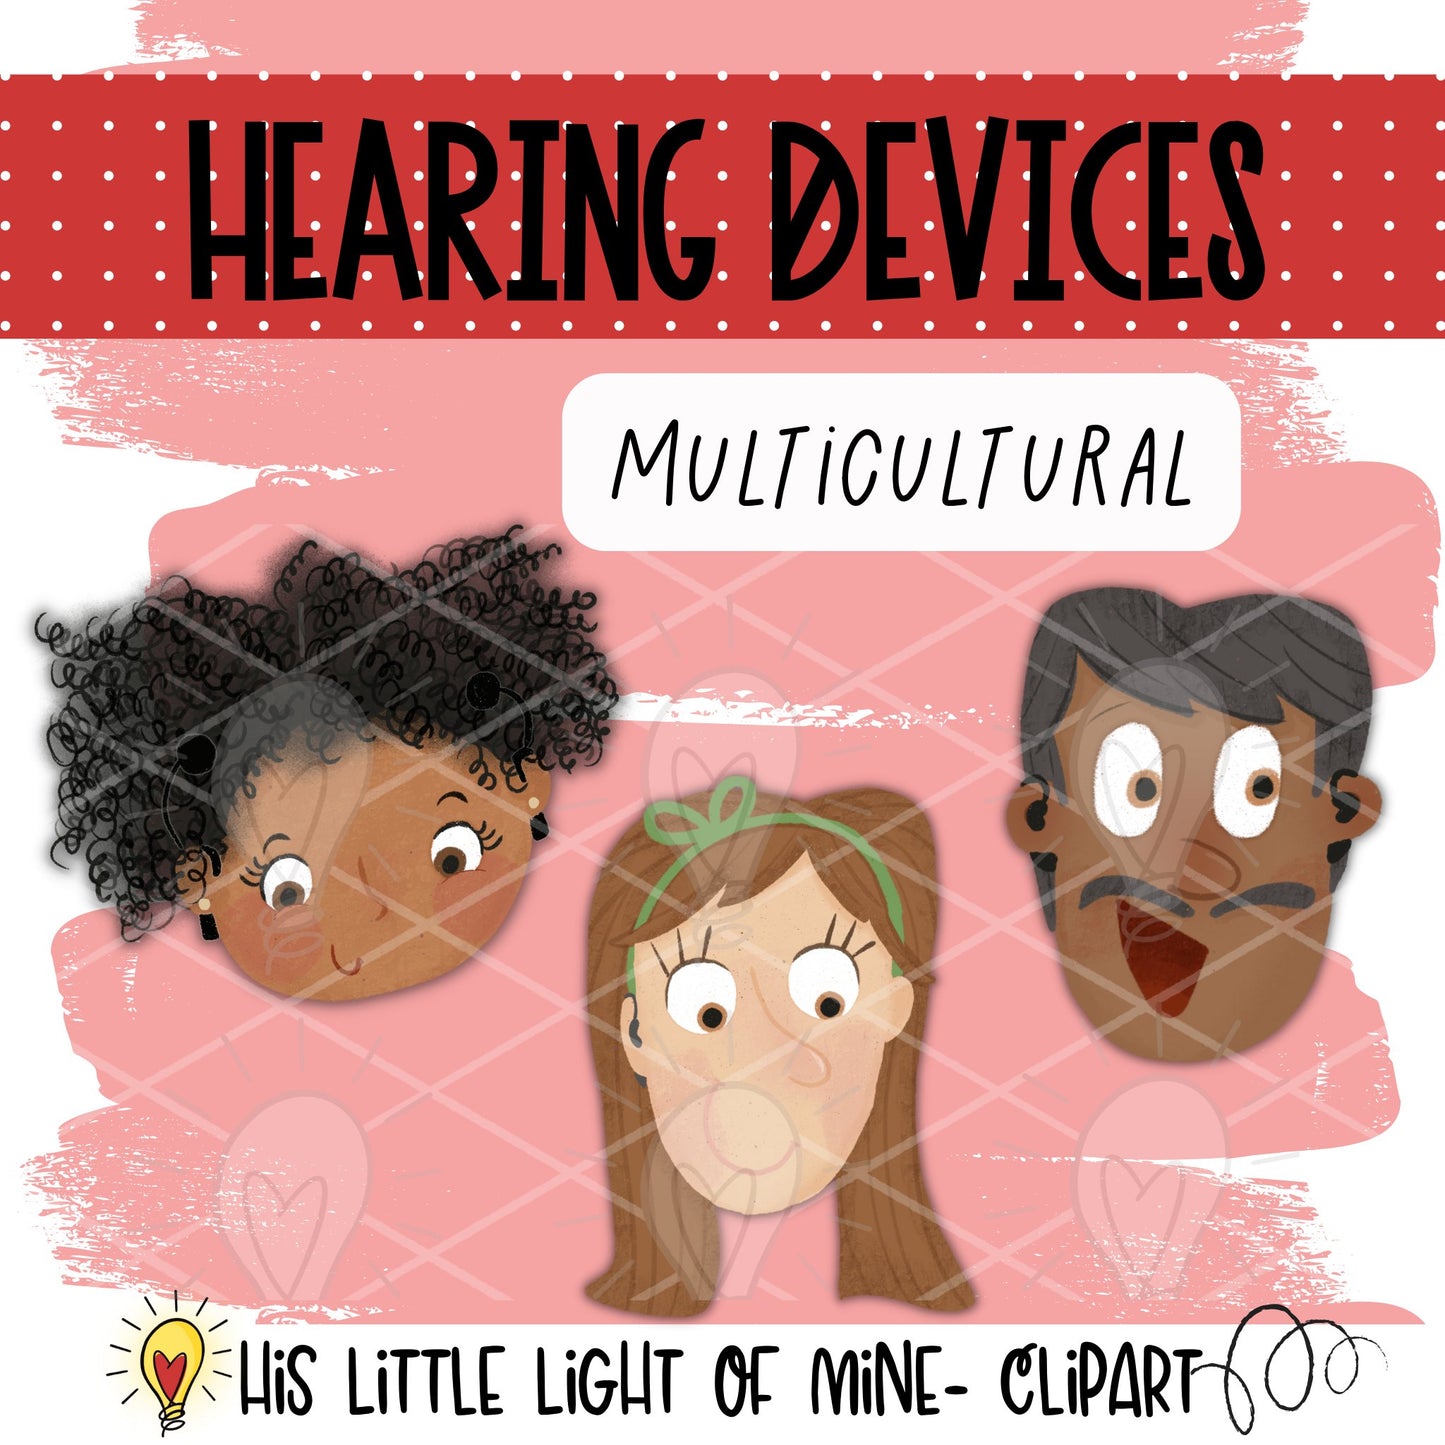 Includes Multicultural options of the Hearing Devices for adults clip art pack featuring cochlear implants and hearing aids, single, bilateral and mixed devices.